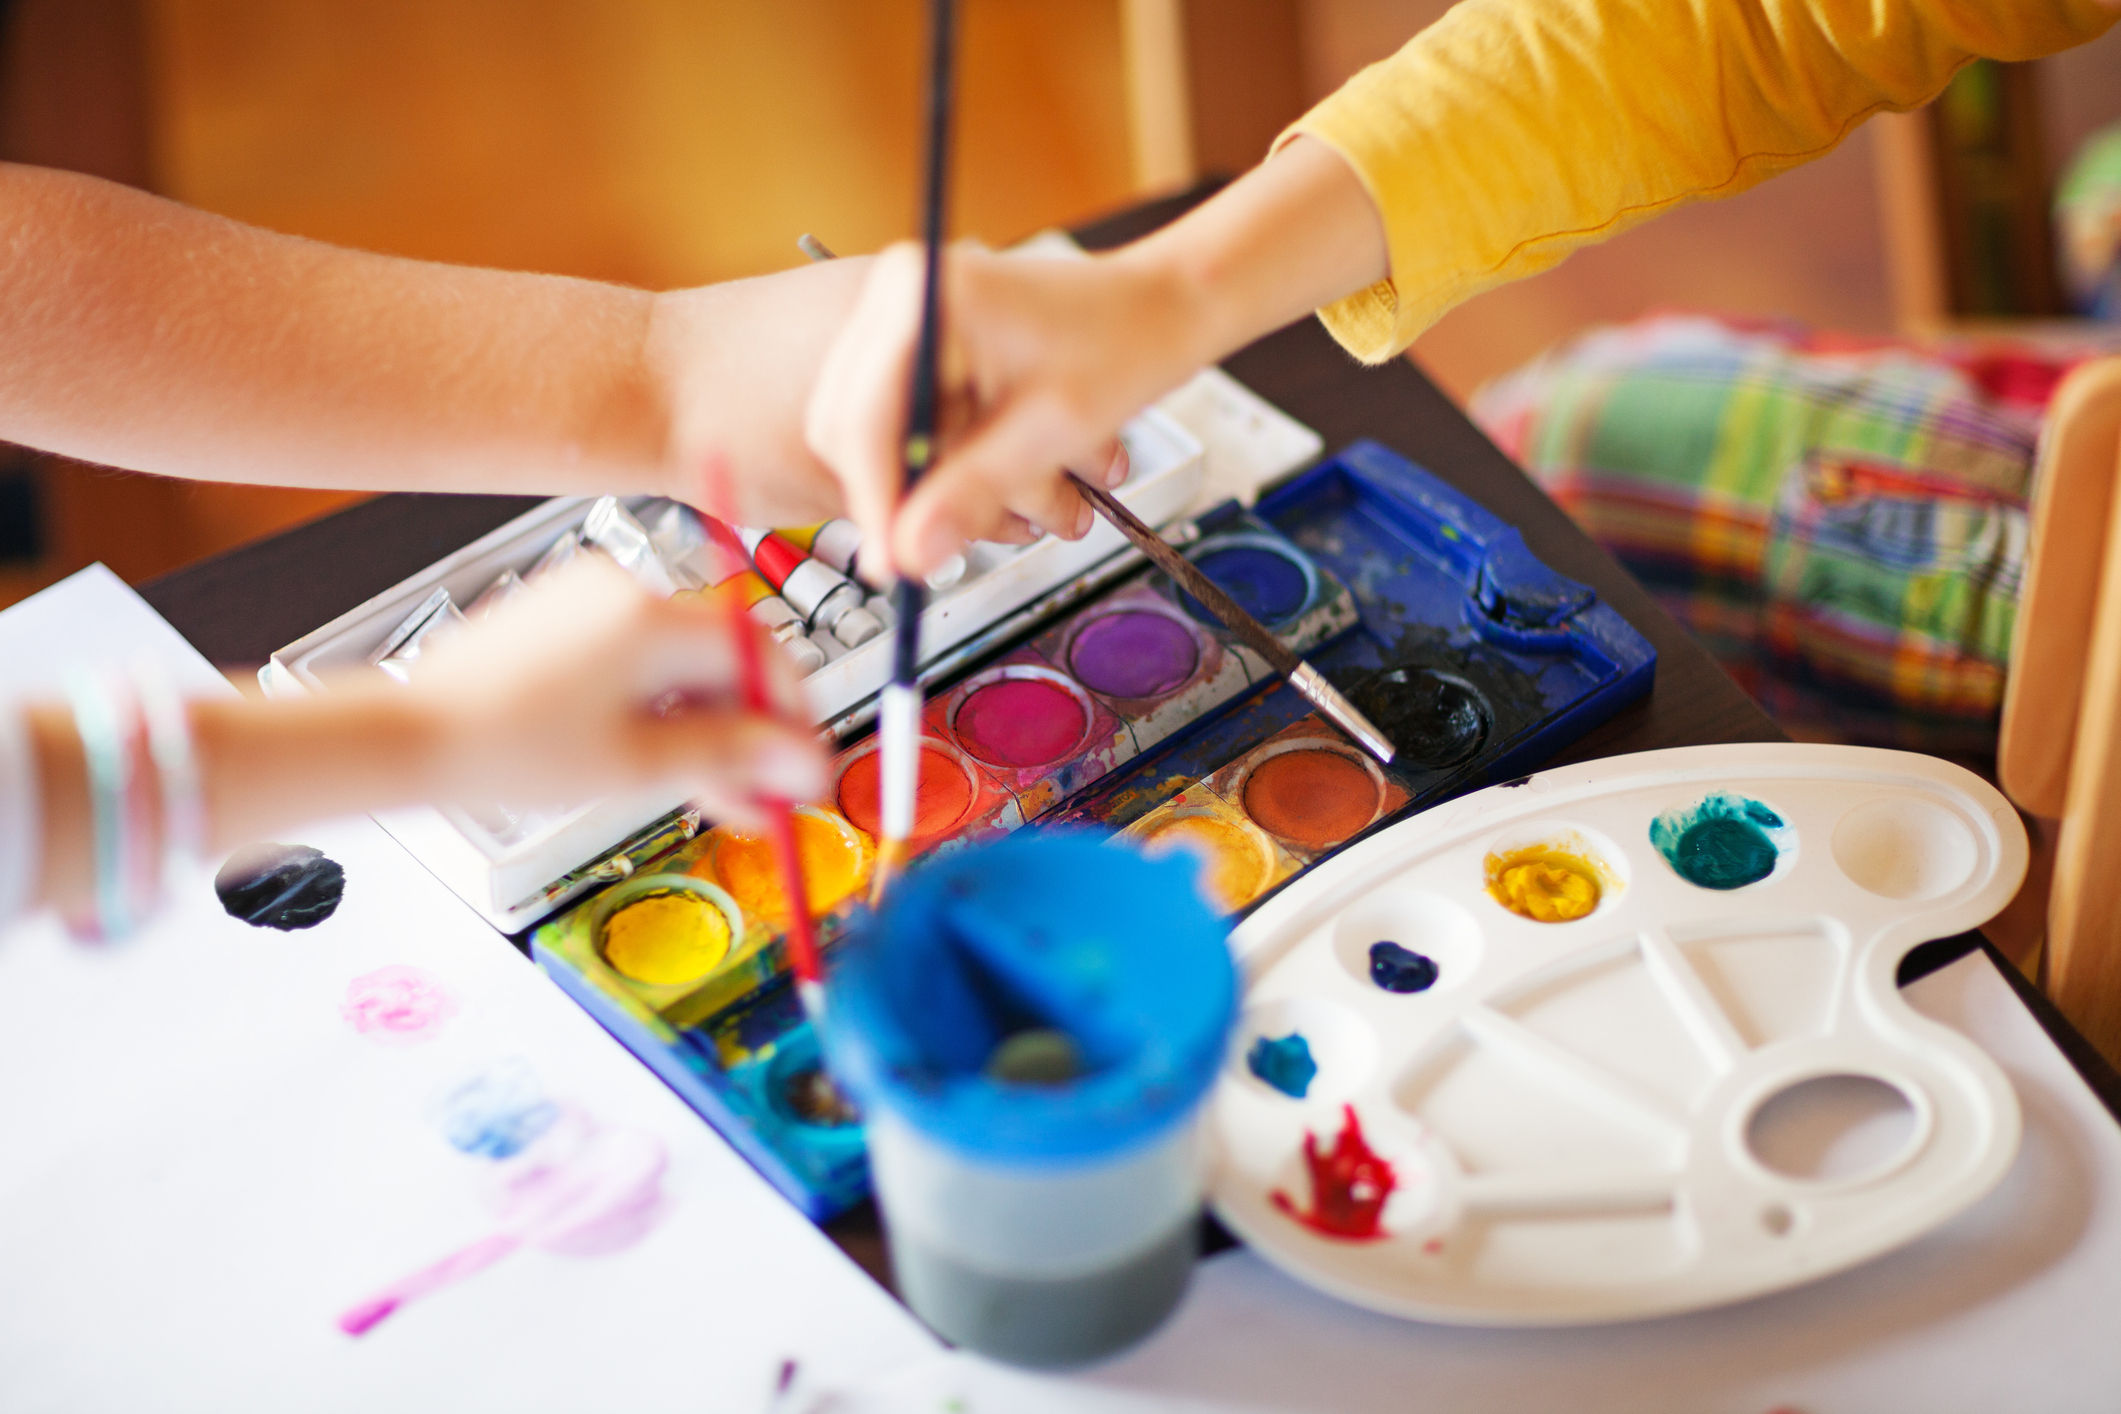 Every Day is Kids' Day: Arts and crafts activities for kids | WTOP